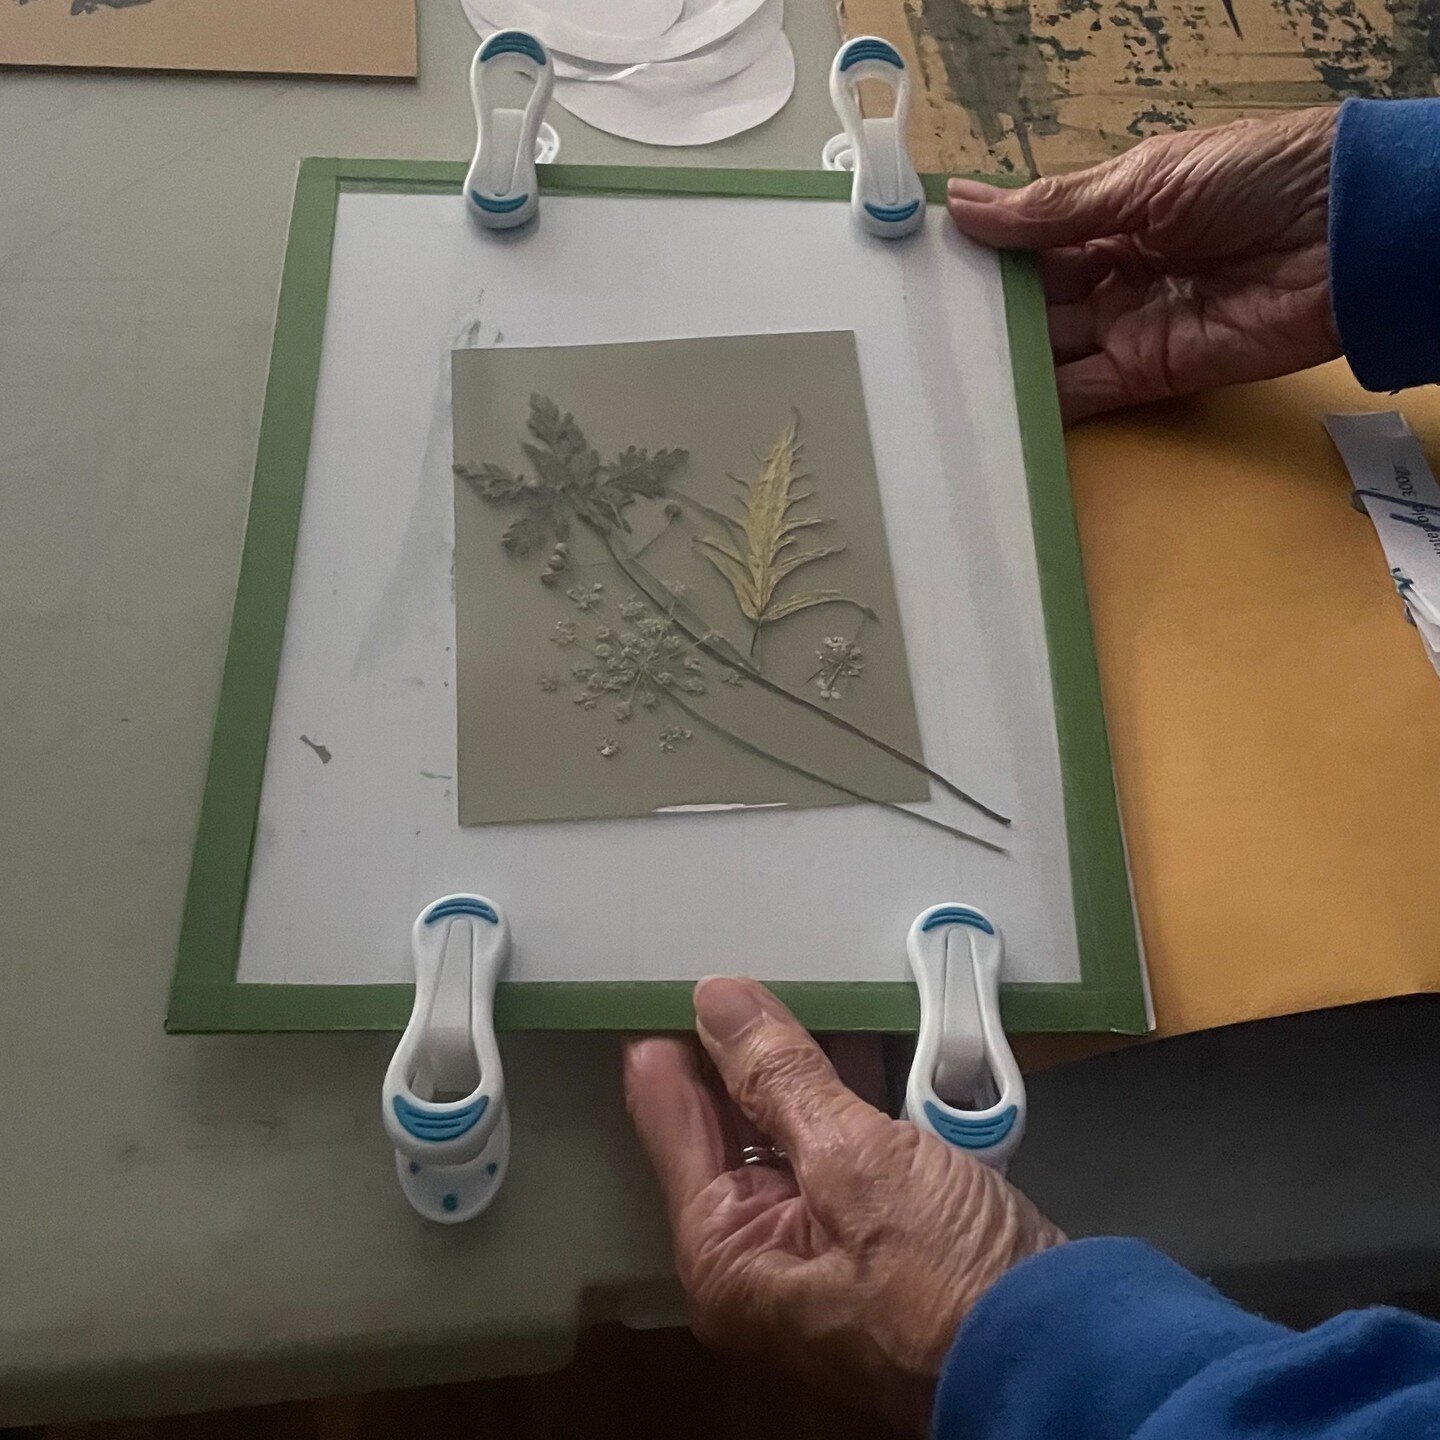 Another rewarding #cyanotype workshop took place in my art studio yesterday.&nbsp;

We started creating the basic cyanotype process using the UV light. We are in the fall in Ontario. It was a cold day and the sun was weak. So we had to use the UV lam